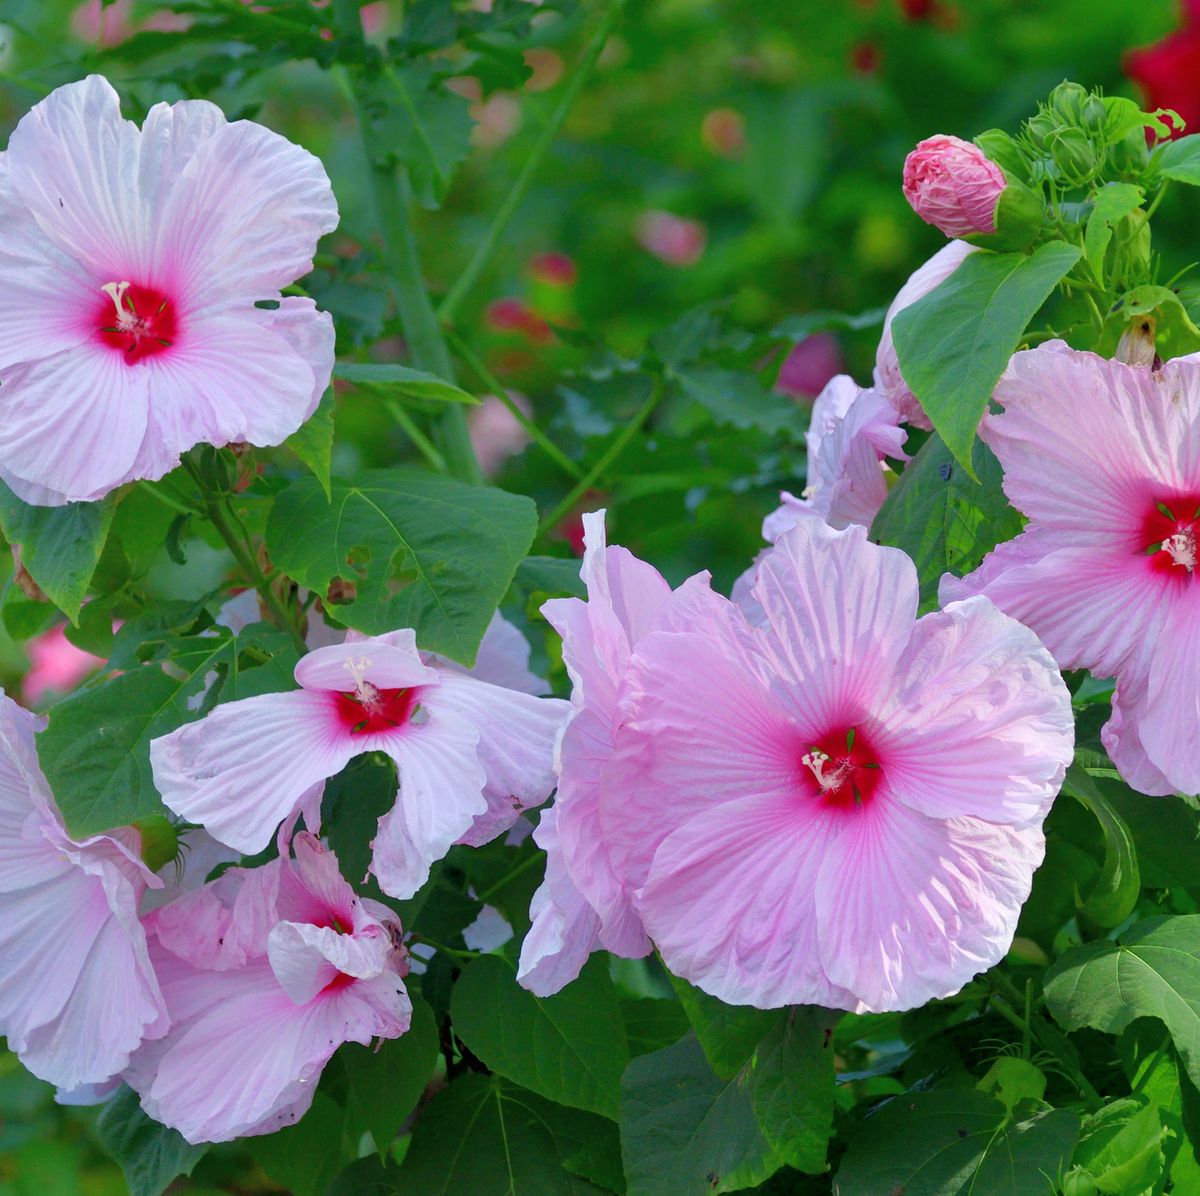 Hibiscus flower - Purchase, use, cooking recipes